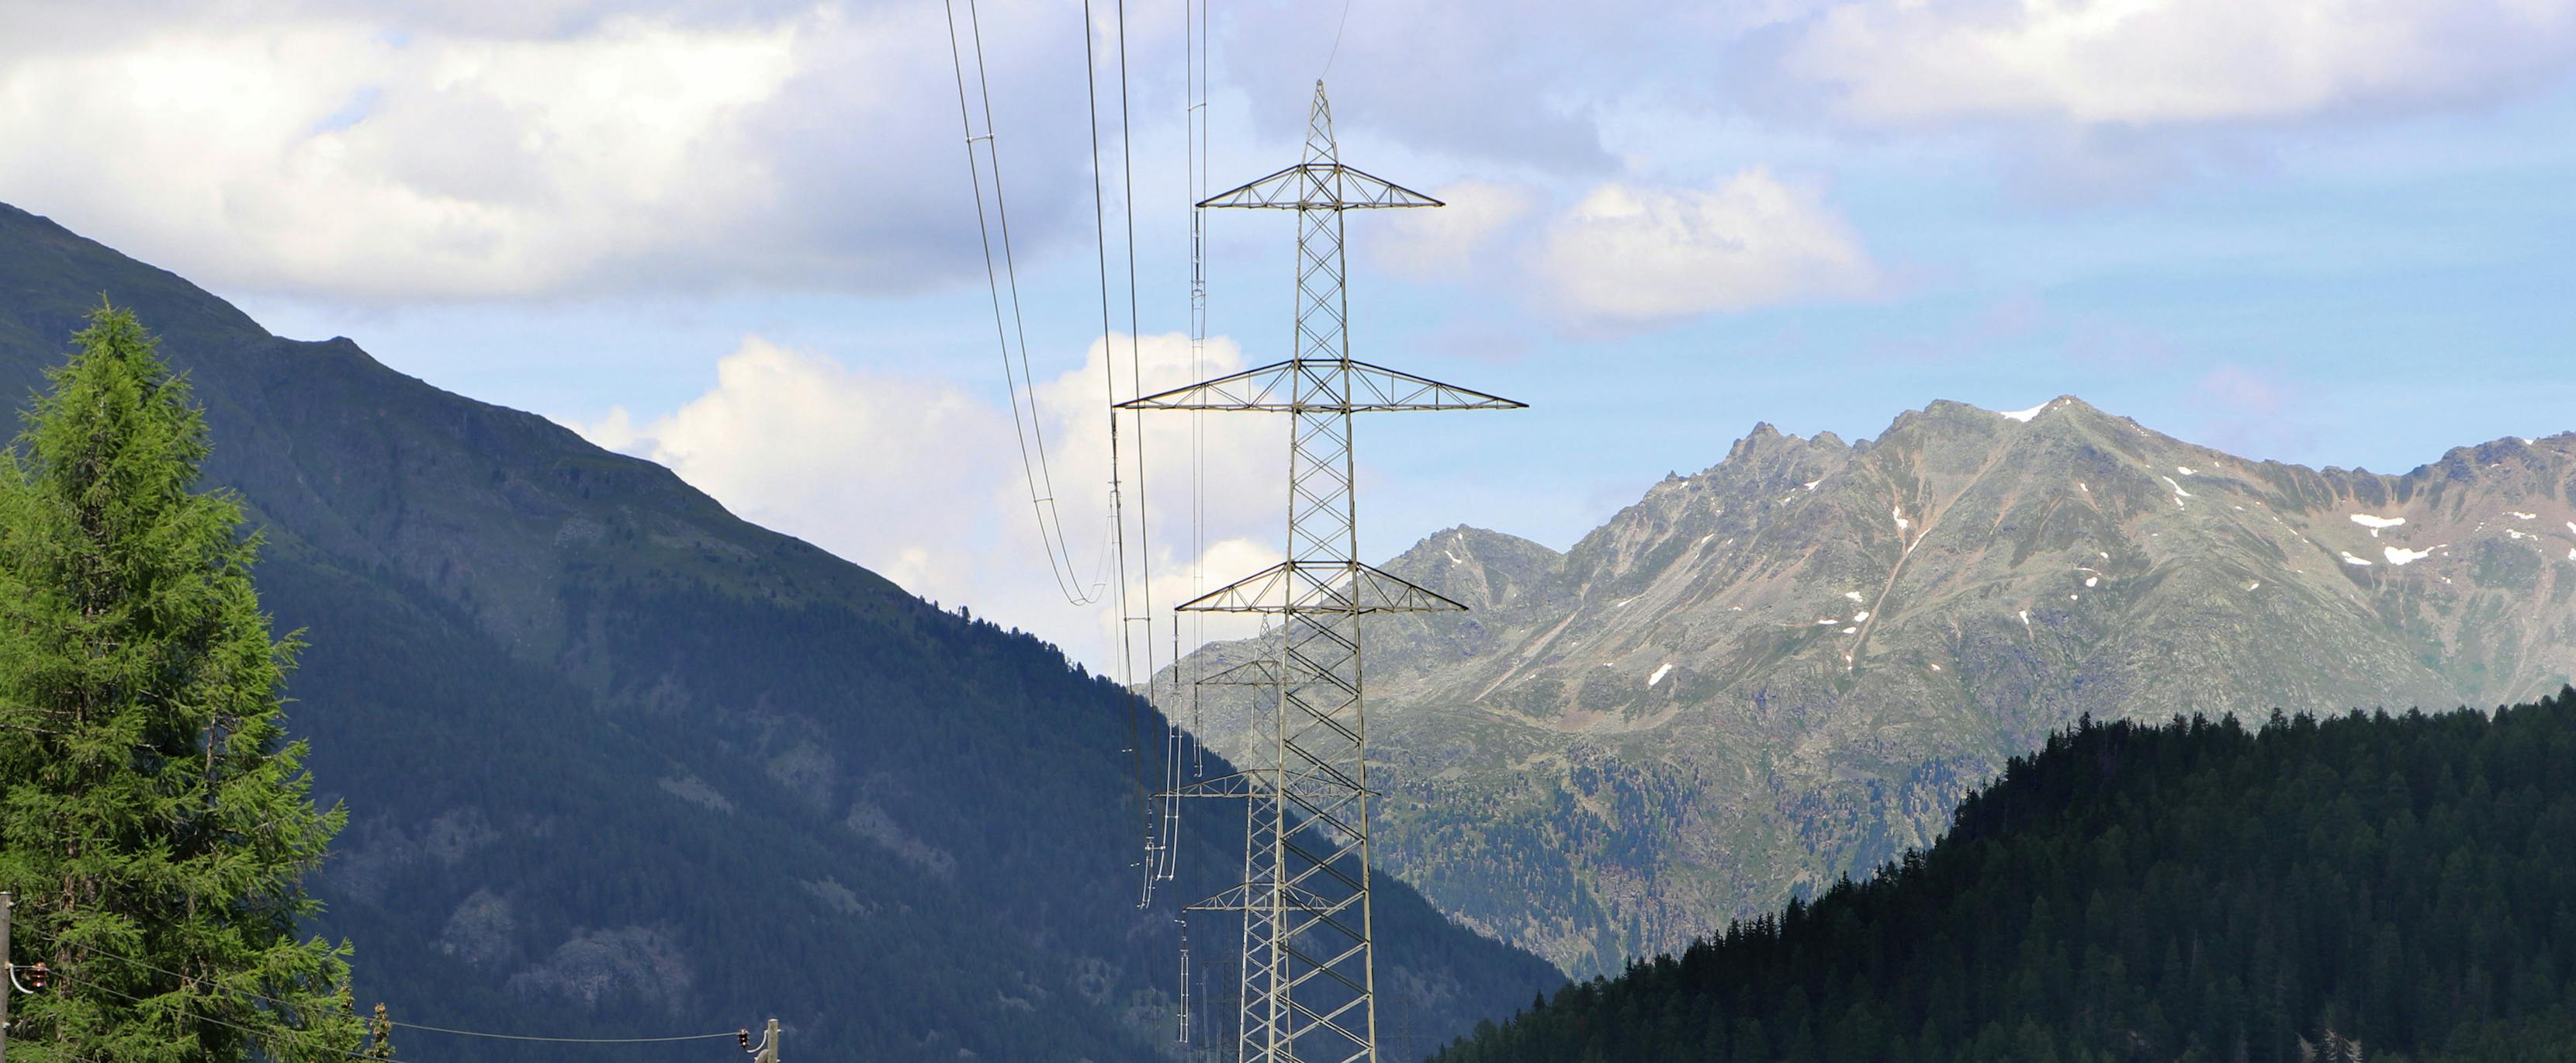 Prior to the project, the pylons between La Punt and Zernez carried a line on only one side.